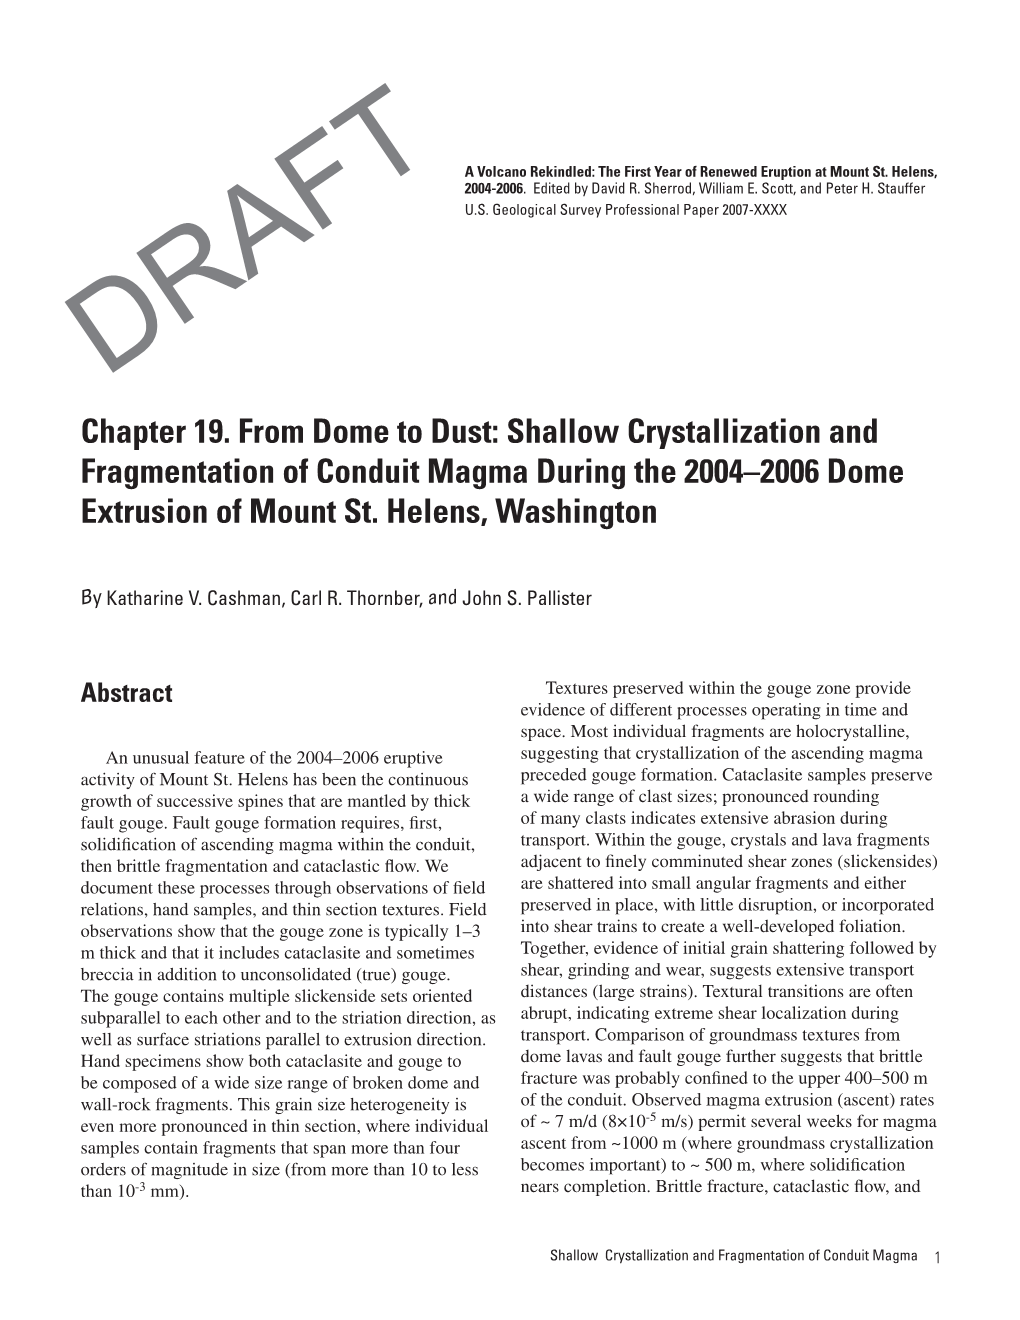 Chapter 19. from Dome to Dust: Shallow Crystallization and Fragmentation of Conduit Magma During the 2004–2006 Dome Extrusion of Mount St